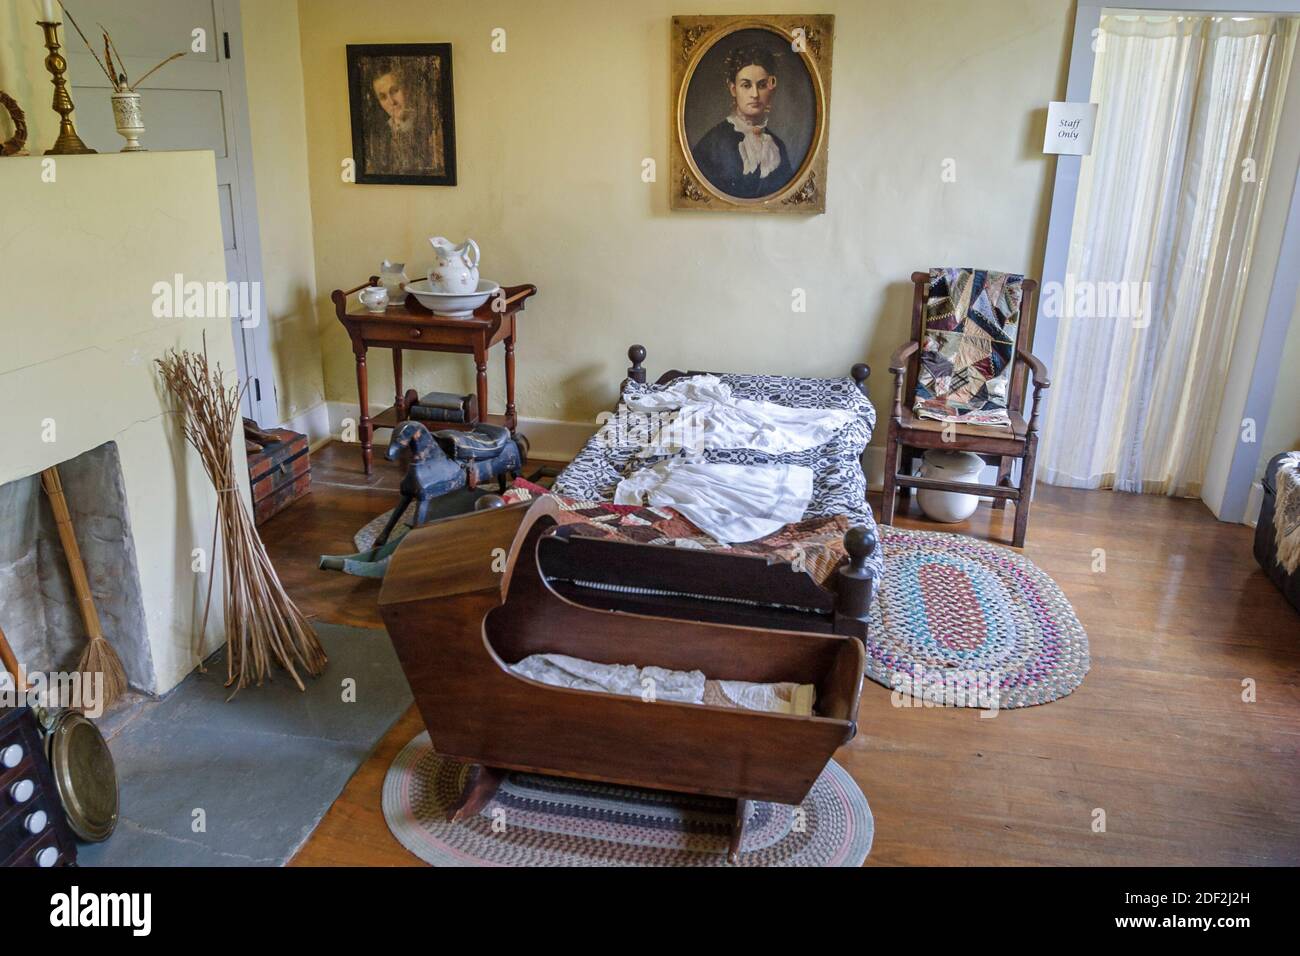 Alabama Florence Pope's Tavern Museum historic inn,collection exhibits stagecoach stop,guest bedroom inside interior, Stock Photo